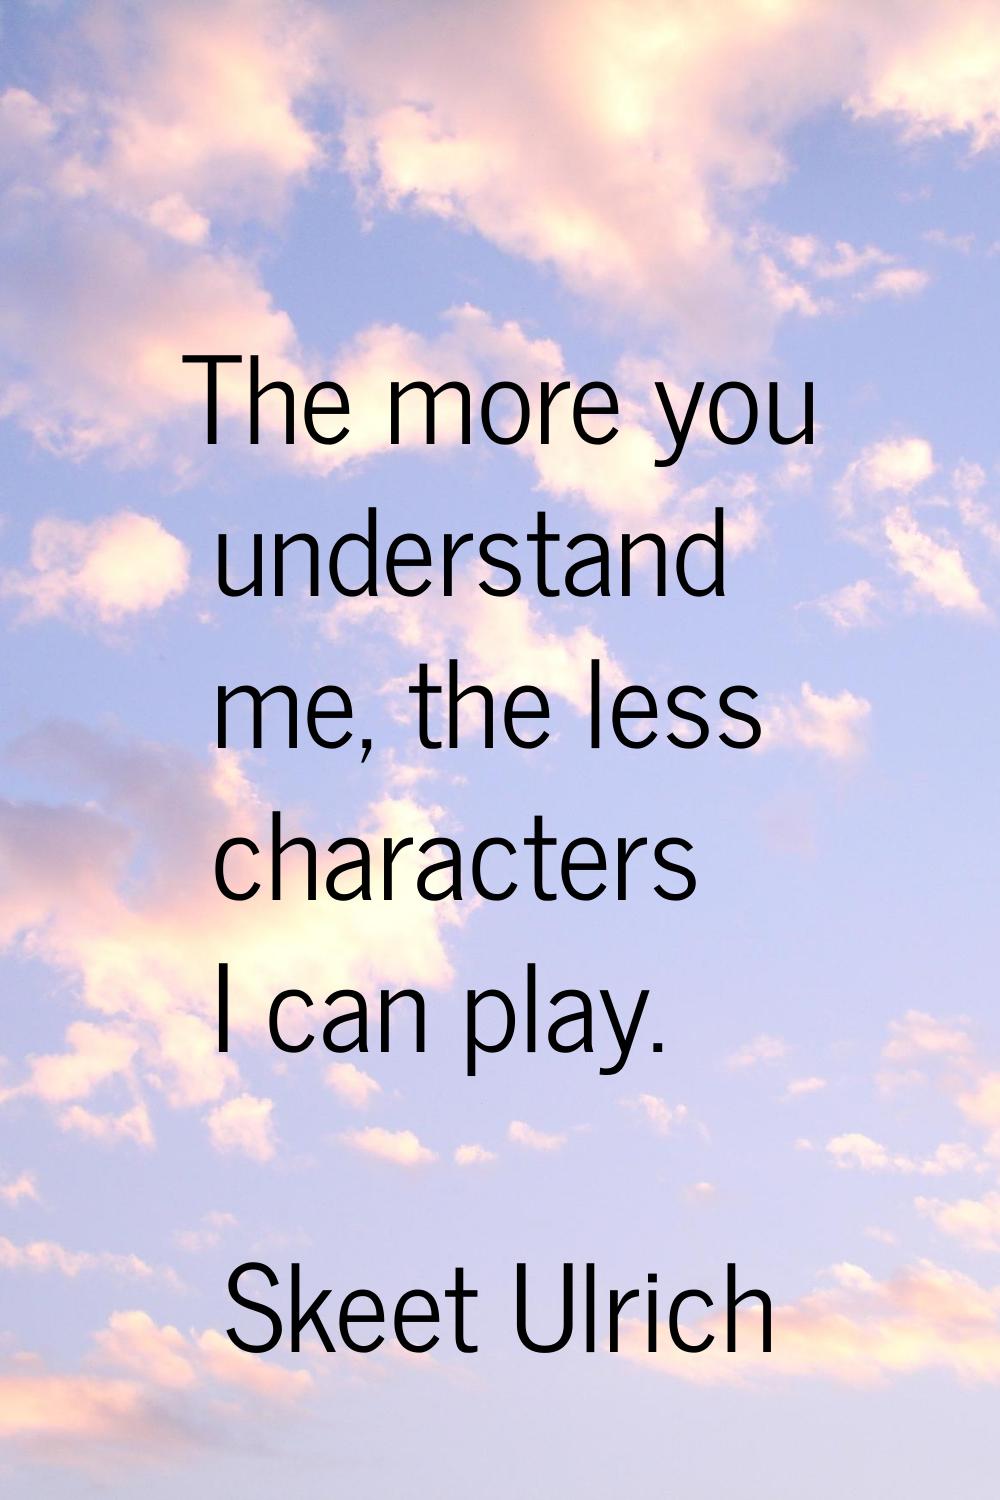 The more you understand me, the less characters I can play.